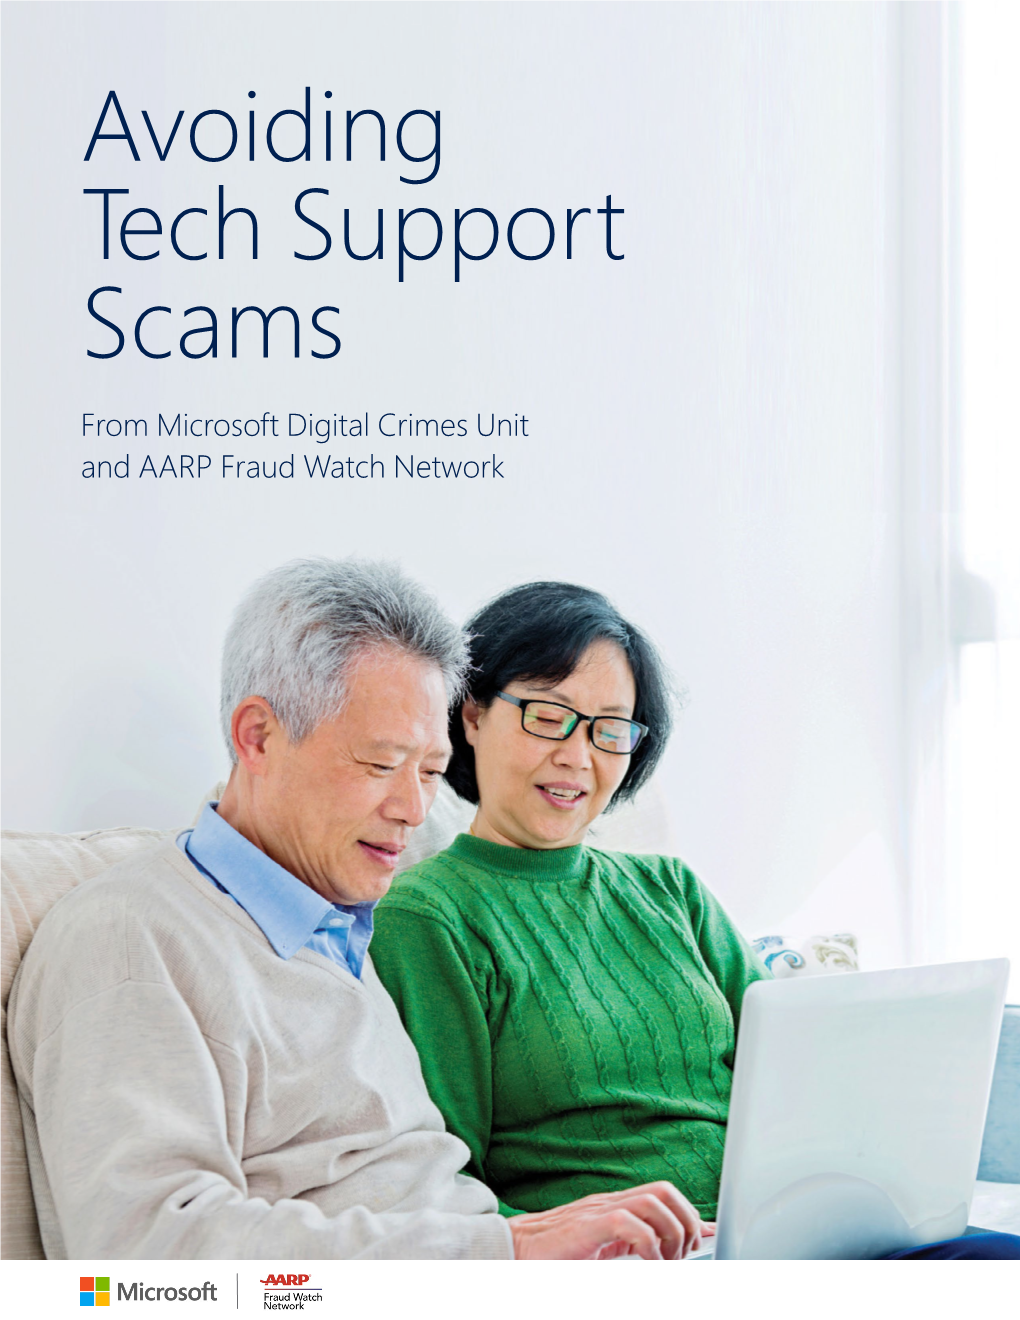 Avoiding Tech Support Scams from Microsoft Digital Crimes Unit and AARP Fraud Watch Network What Is a Tech Support Scam and Who Is Targeted?